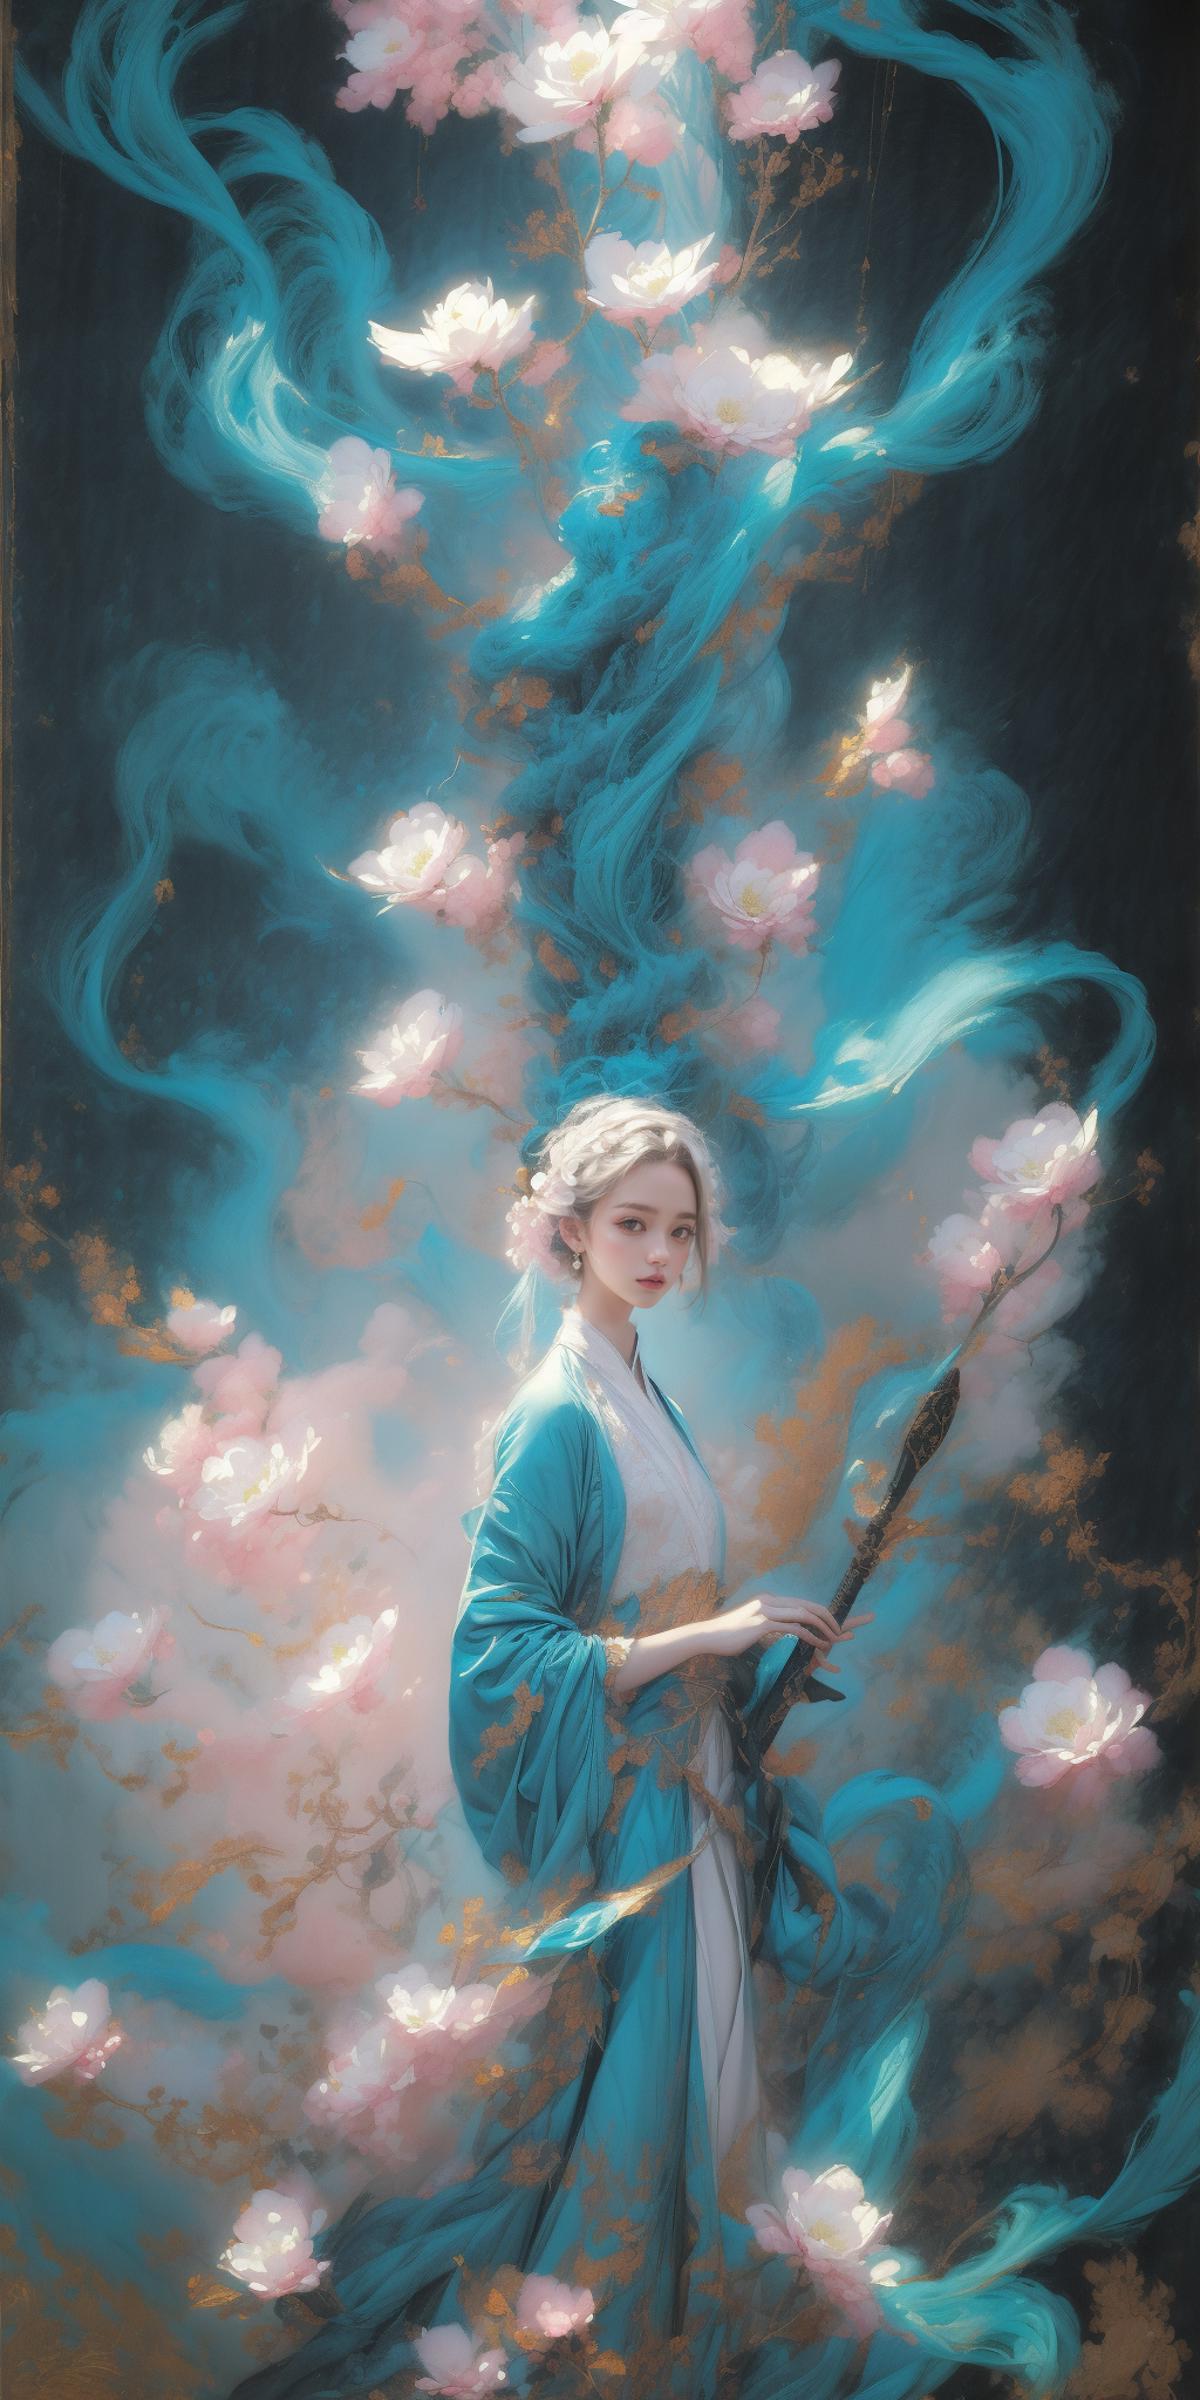 A woman in a blue dress holding a wand surrounded by flowers.